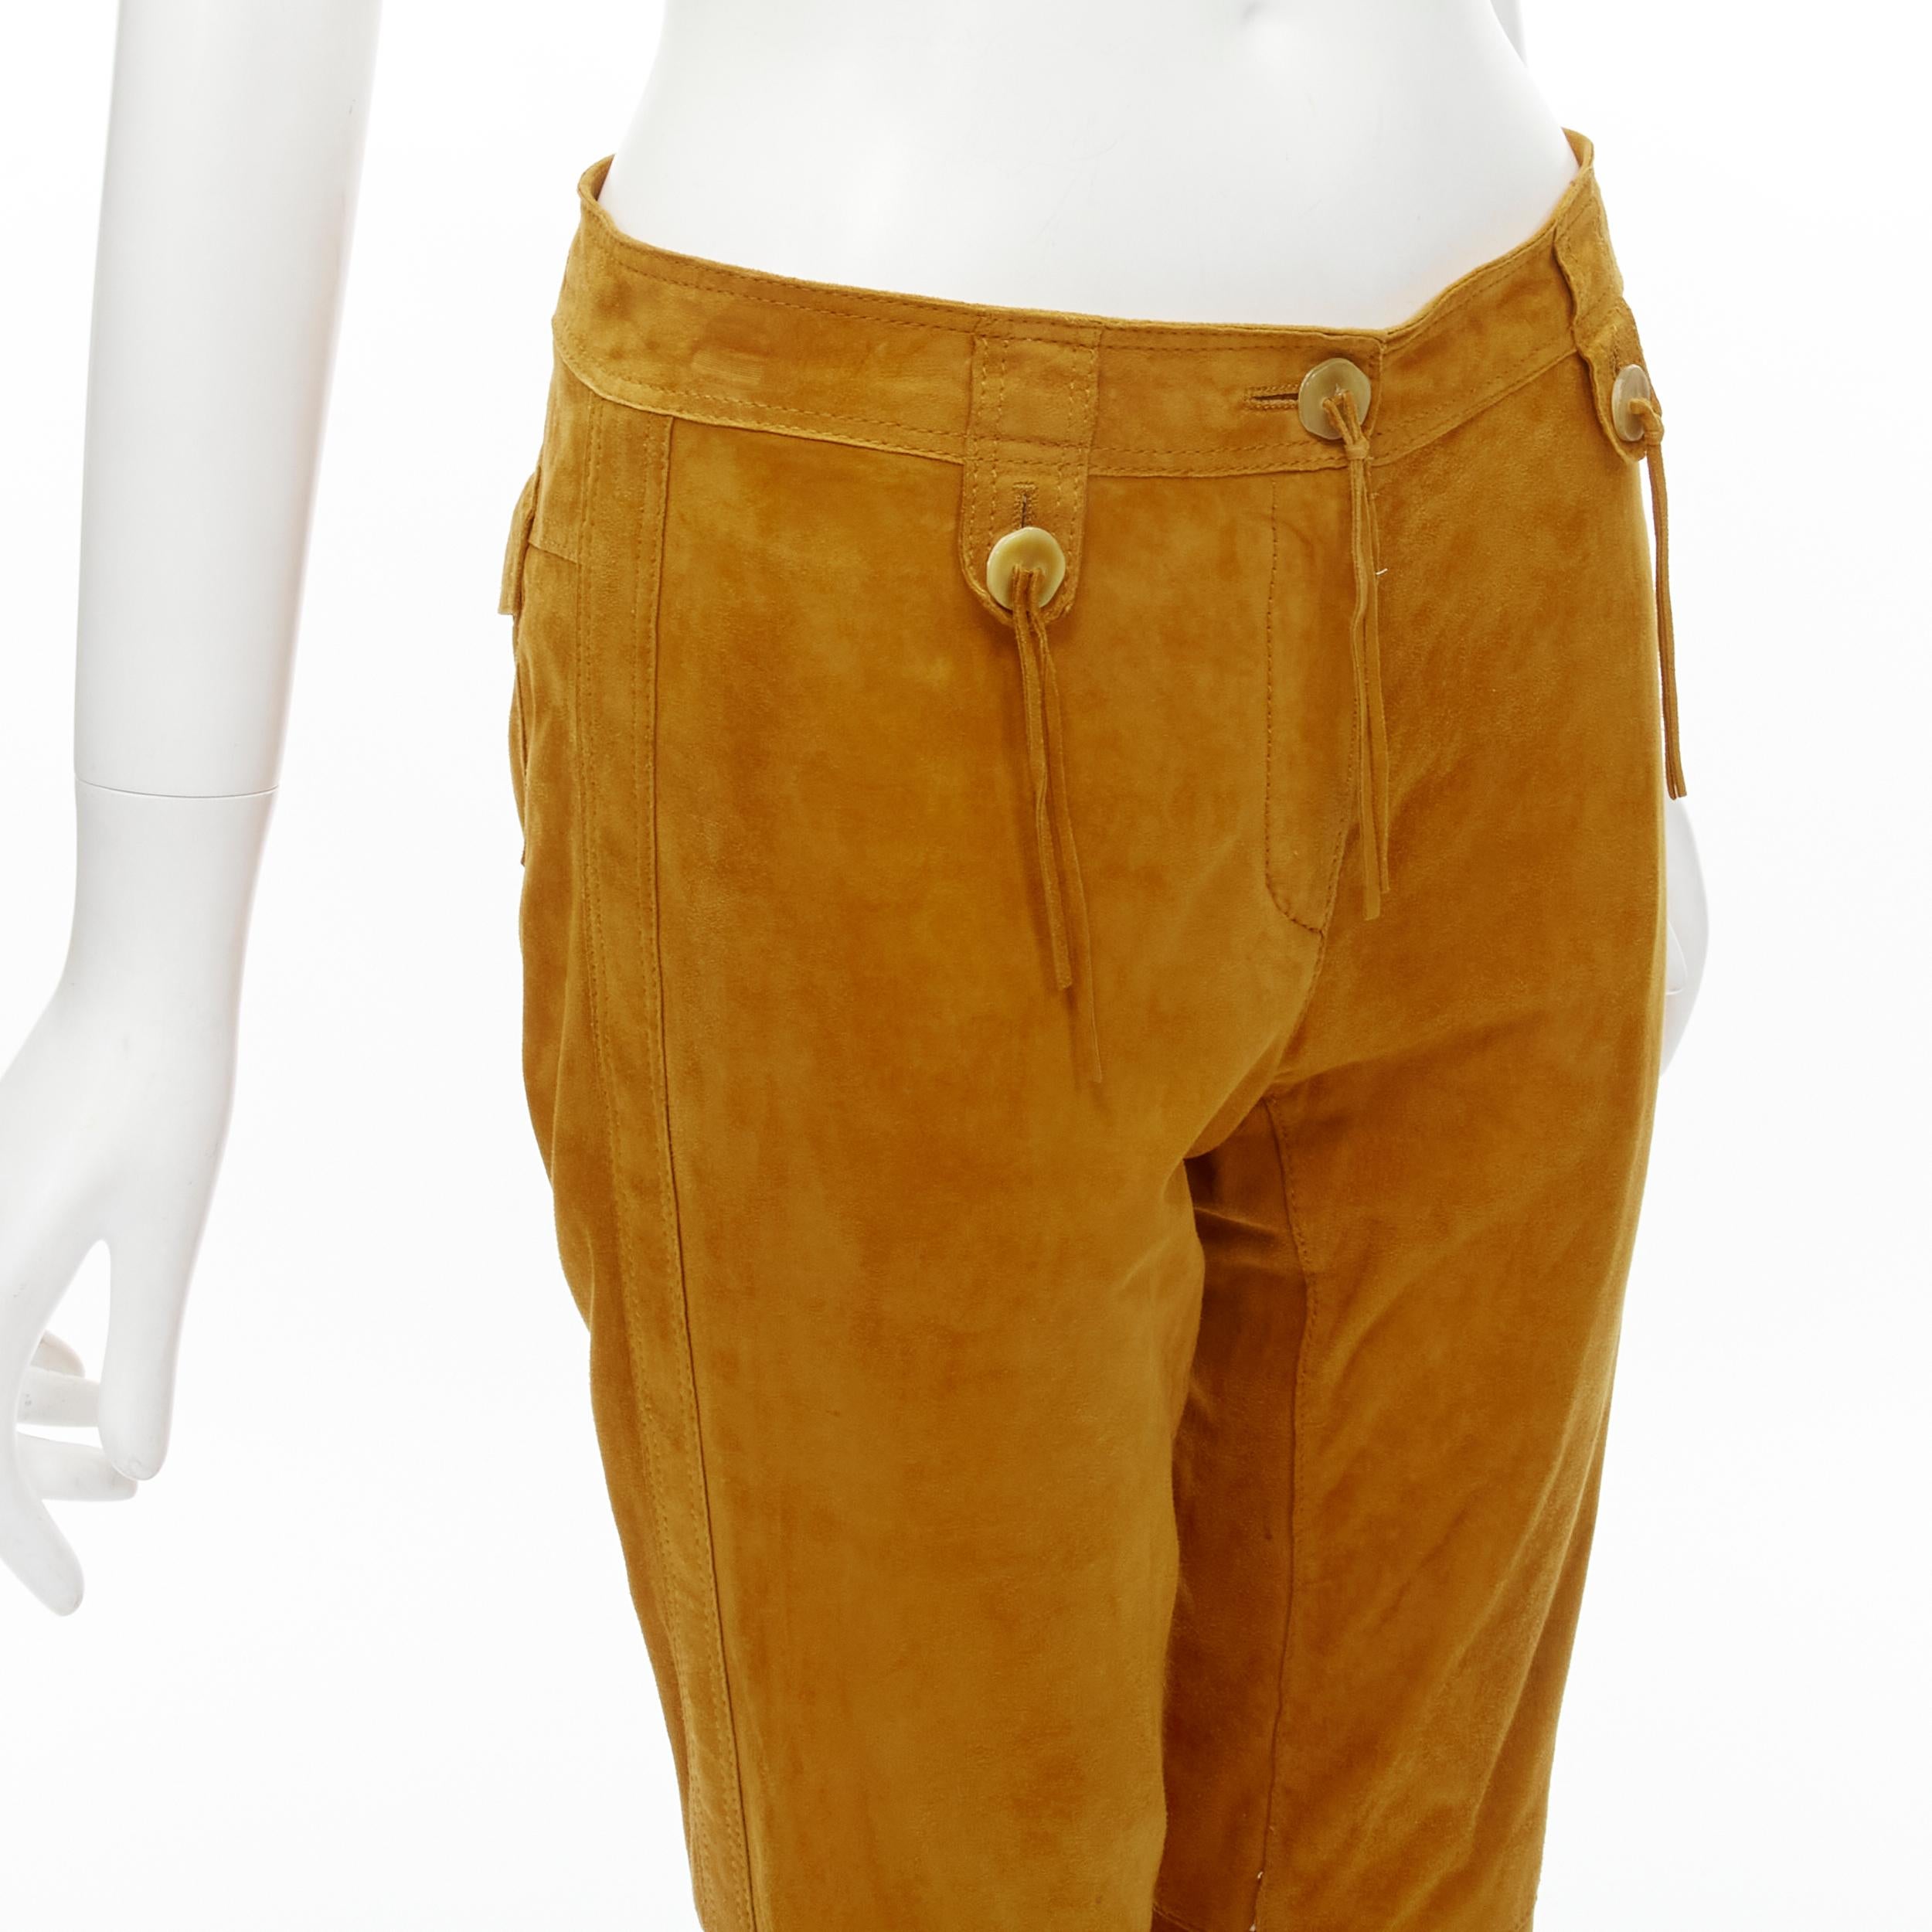 DOLCE GABBANA Vintage tan brown suede leather tassel button pants IT38 XS 
Reference: TGAS/C01252 
Brand: Dolce Gabbana 
Material: Suede 
Color: Brown 
Pattern: Solid 
Closure: Zip Fly 
Extra Detail: Tan brown suede leather upper. Button detailing